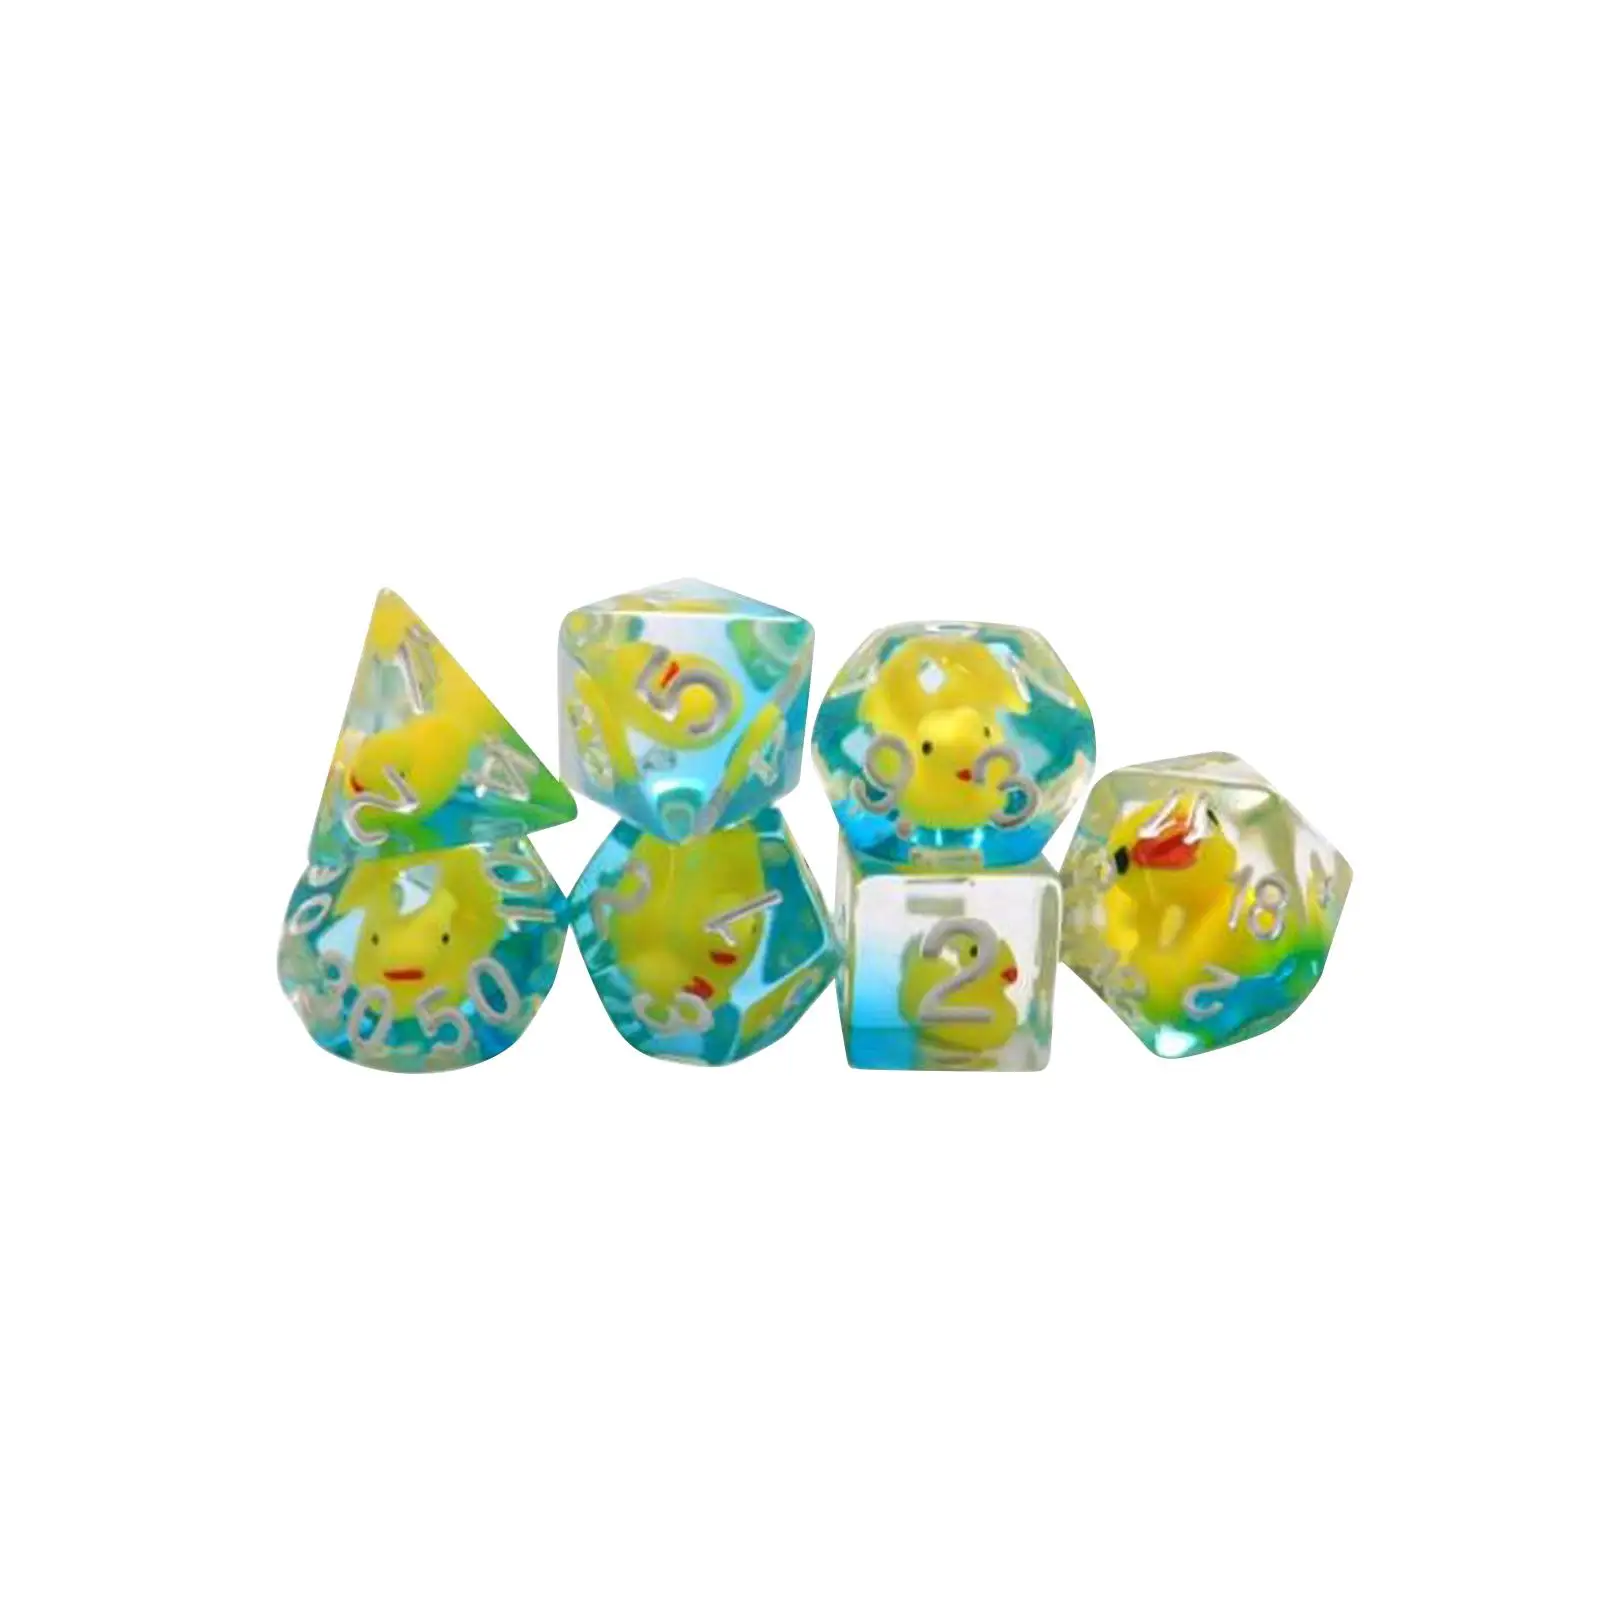 7x Polyhedral Dices D4 D8 D10 D12 D20 Multi Sided Dices for KTV Card Games Multicolour Dices Set Polyhedral Dices Set